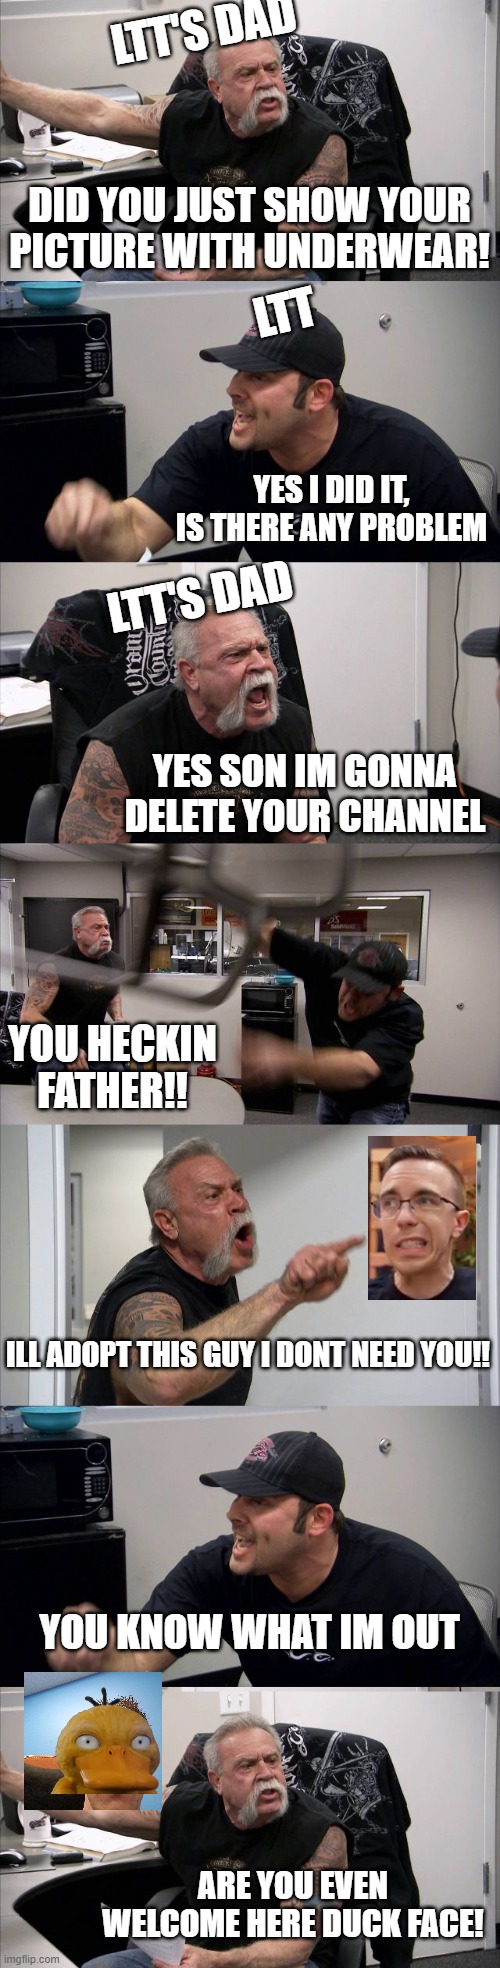 Og thats a long fight | LTT'S DAD; DID YOU JUST SHOW YOUR PICTURE WITH UNDERWEAR! LTT; YES I DID IT, IS THERE ANY PROBLEM; LTT'S DAD; YES SON IM GONNA DELETE YOUR CHANNEL; YOU HECKIN FATHER!! ILL ADOPT THIS GUY I DONT NEED YOU!! YOU KNOW WHAT IM OUT; ARE YOU EVEN WELCOME HERE DUCK FACE! | image tagged in memes,american chopper argument,ltt,linus,funny,lol | made w/ Imgflip meme maker